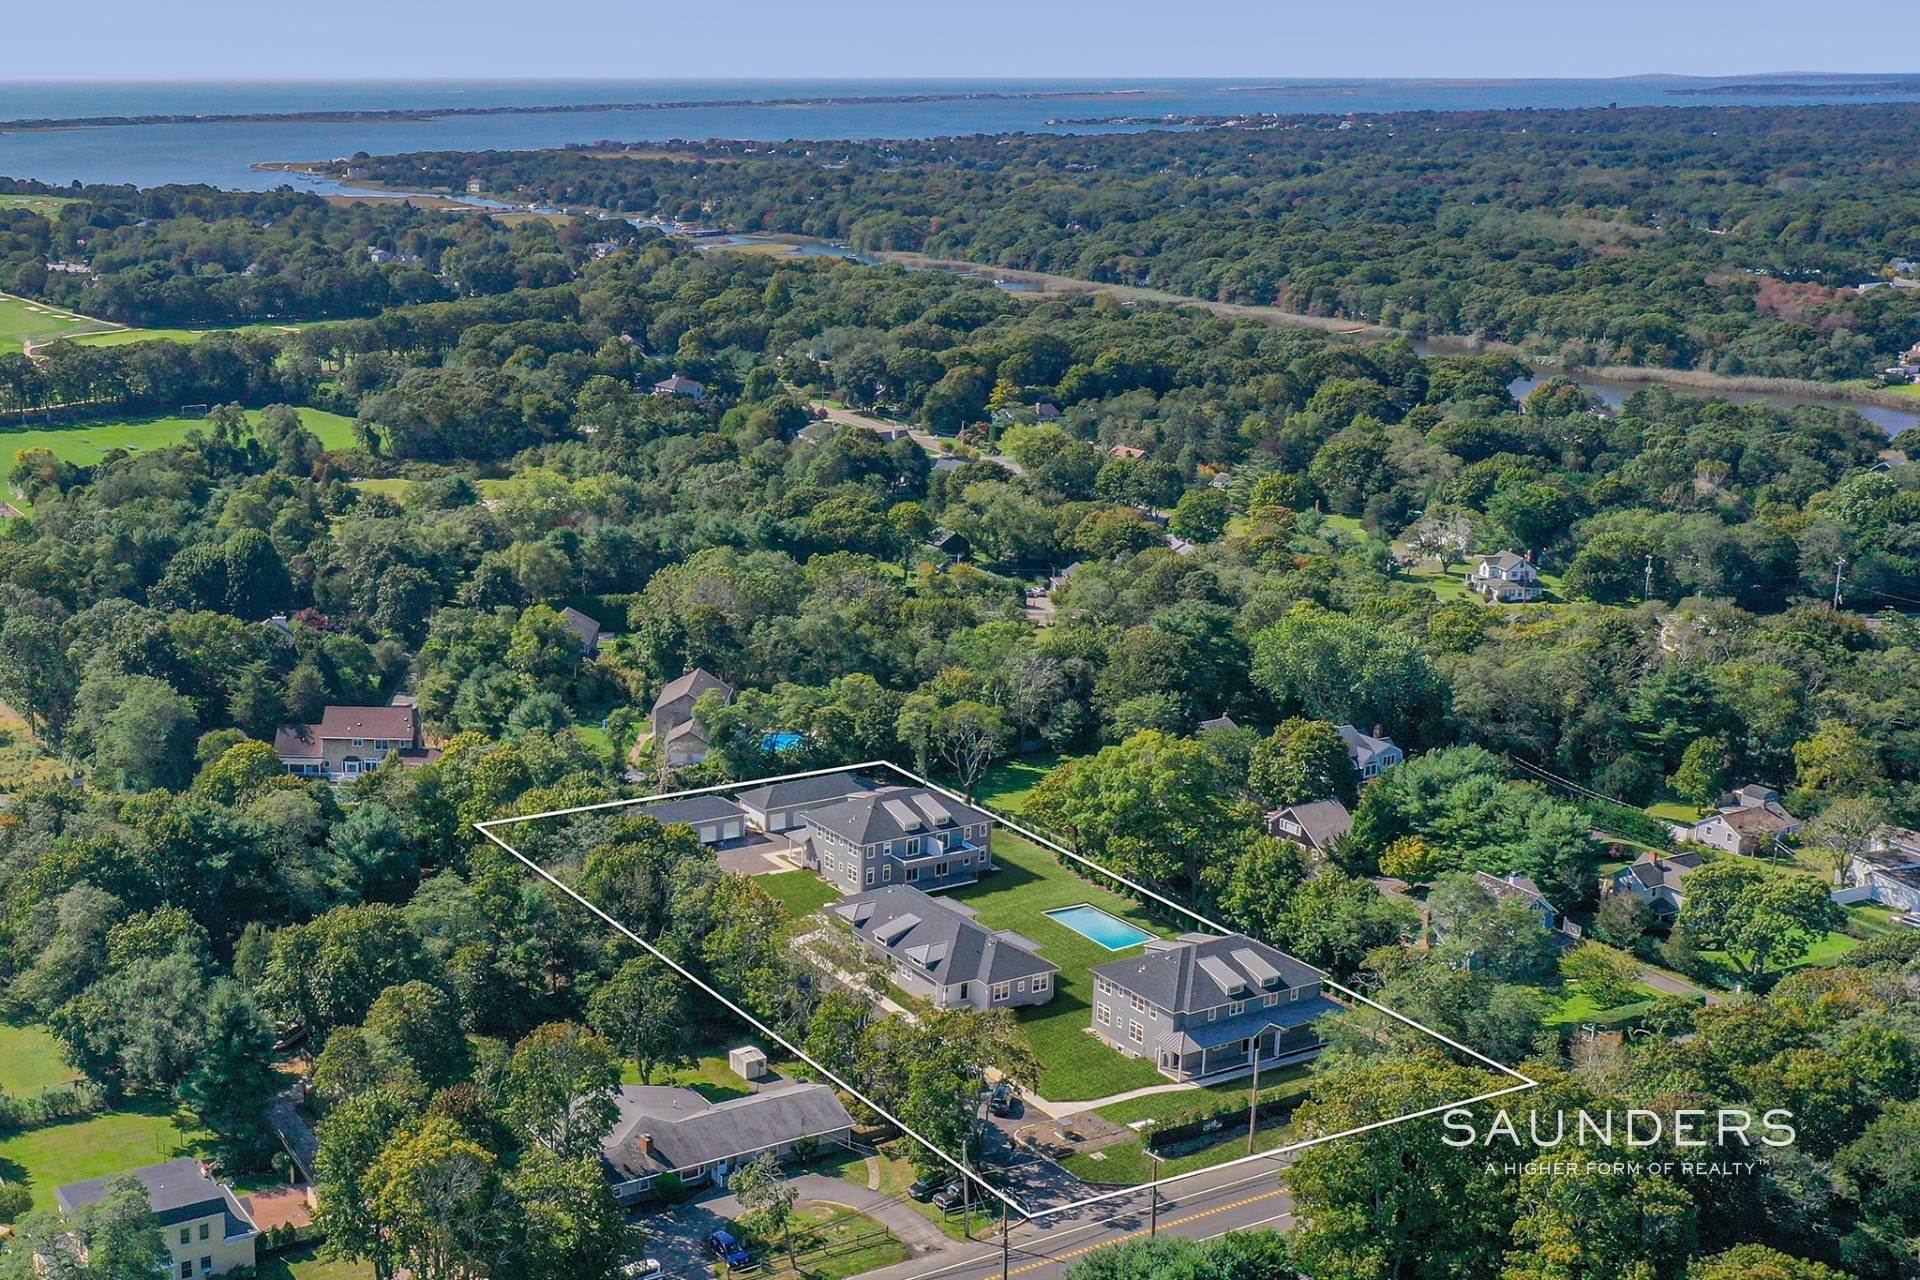 1. Townhouse for Sale at The Enclave - Westhampton 19 Montauk Highway, Unit 10, Westhampton, NY 11977